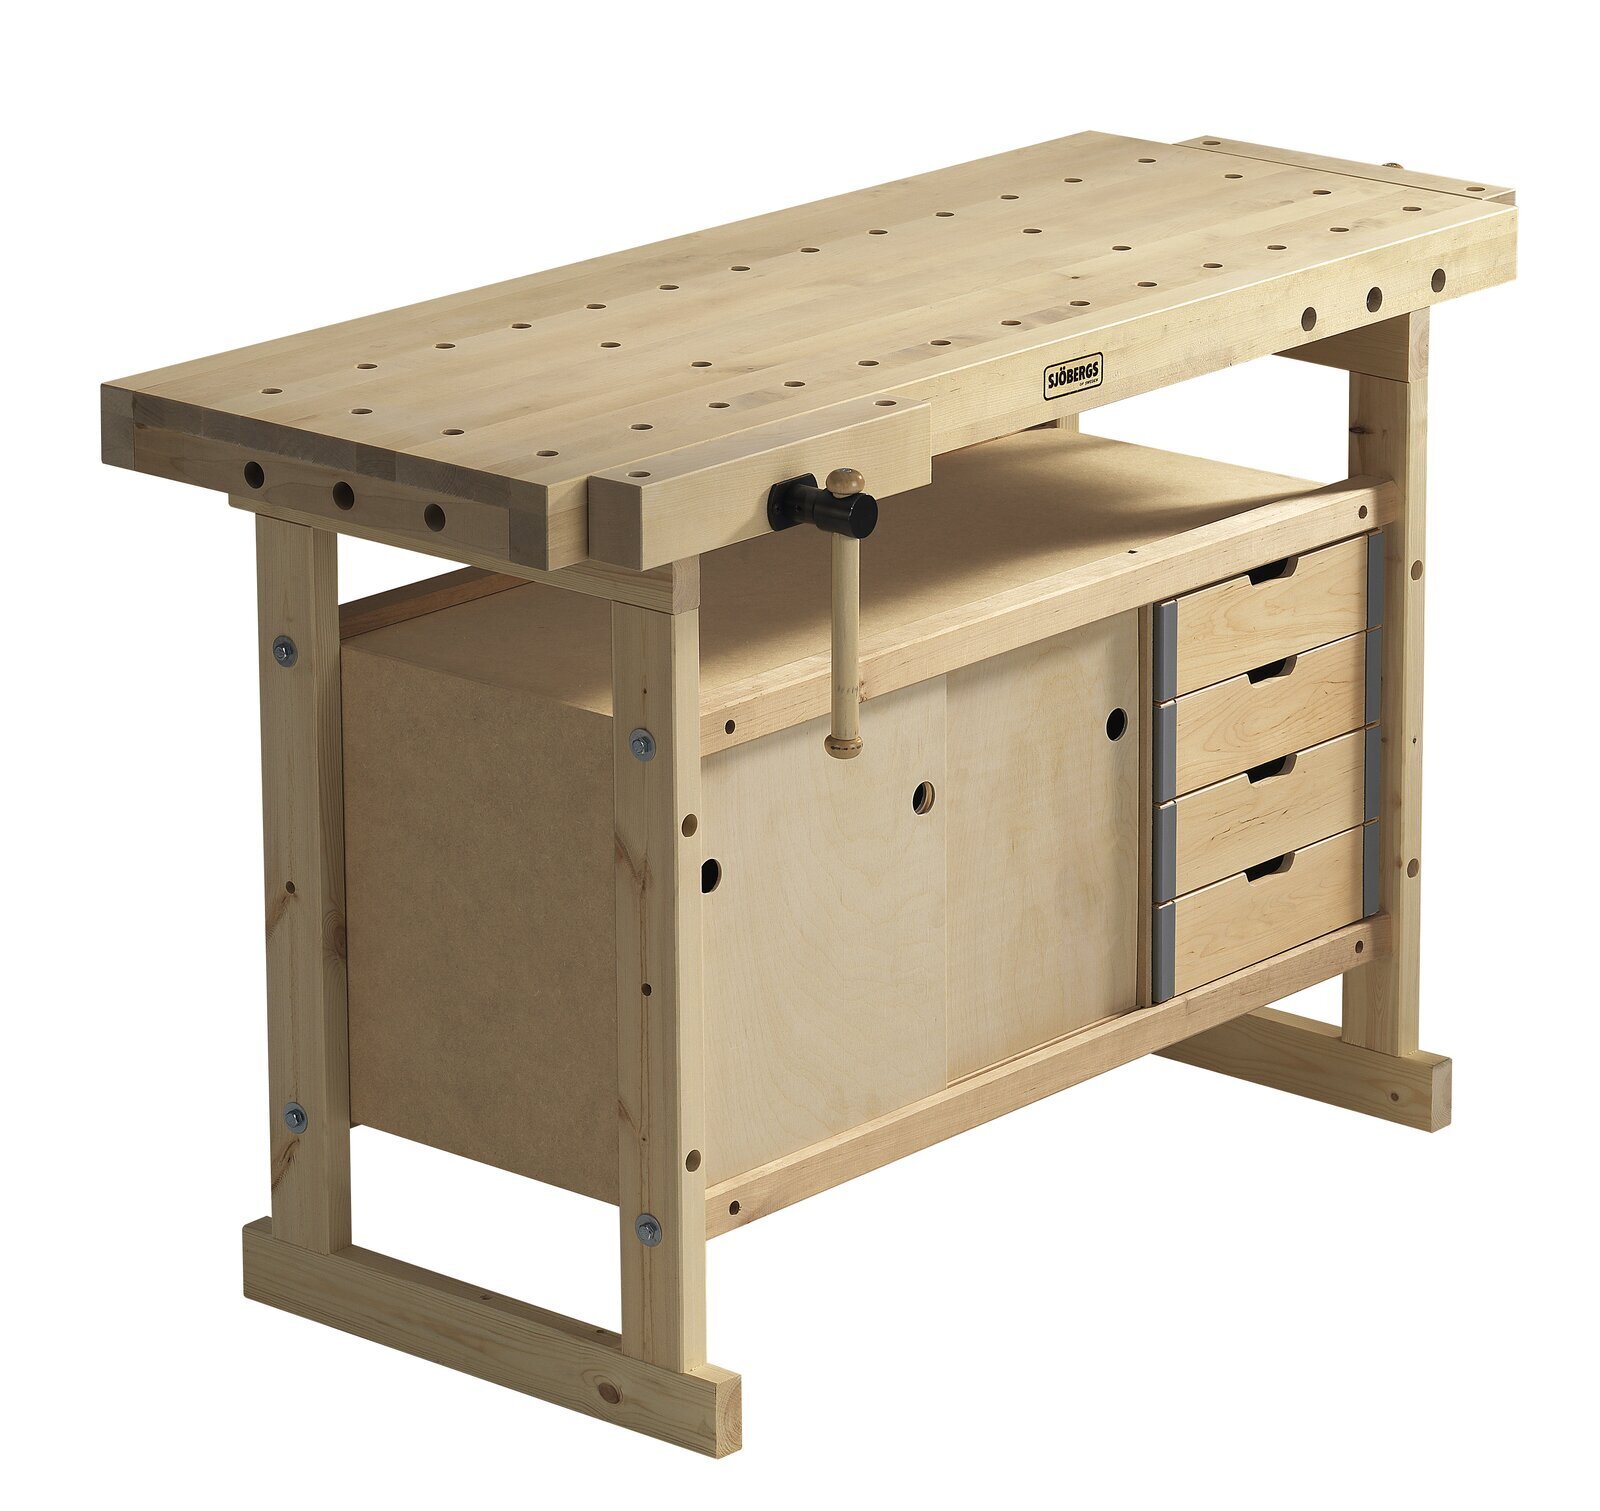 57” Wood Top Workbench With Storage Cabinet